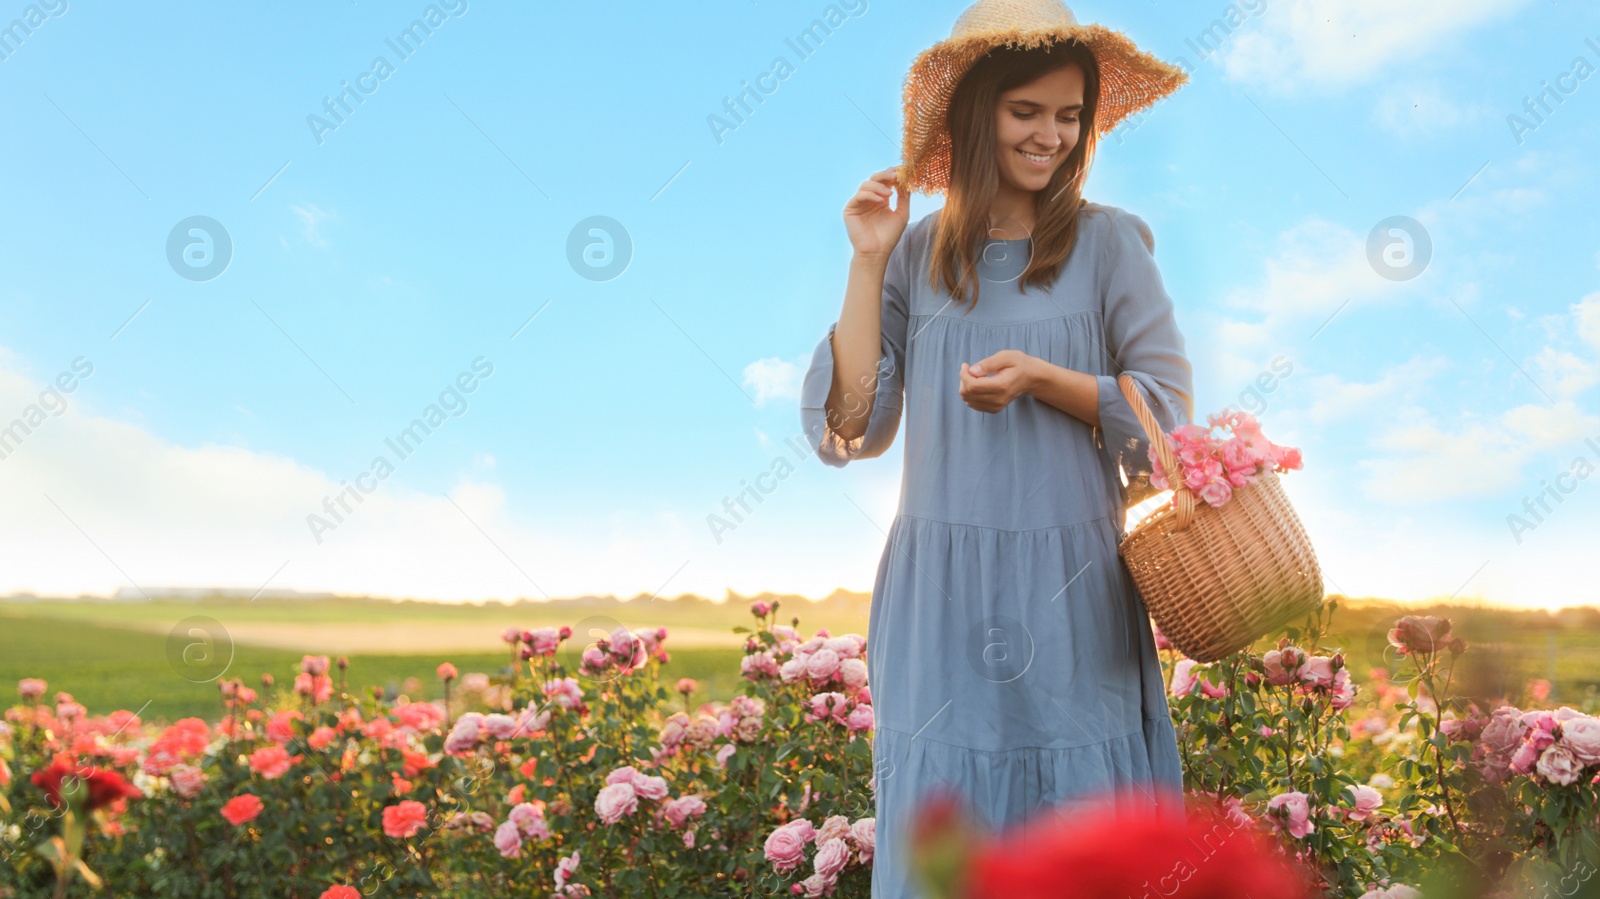 Photo of Woman with basket of roses in beautiful blooming field